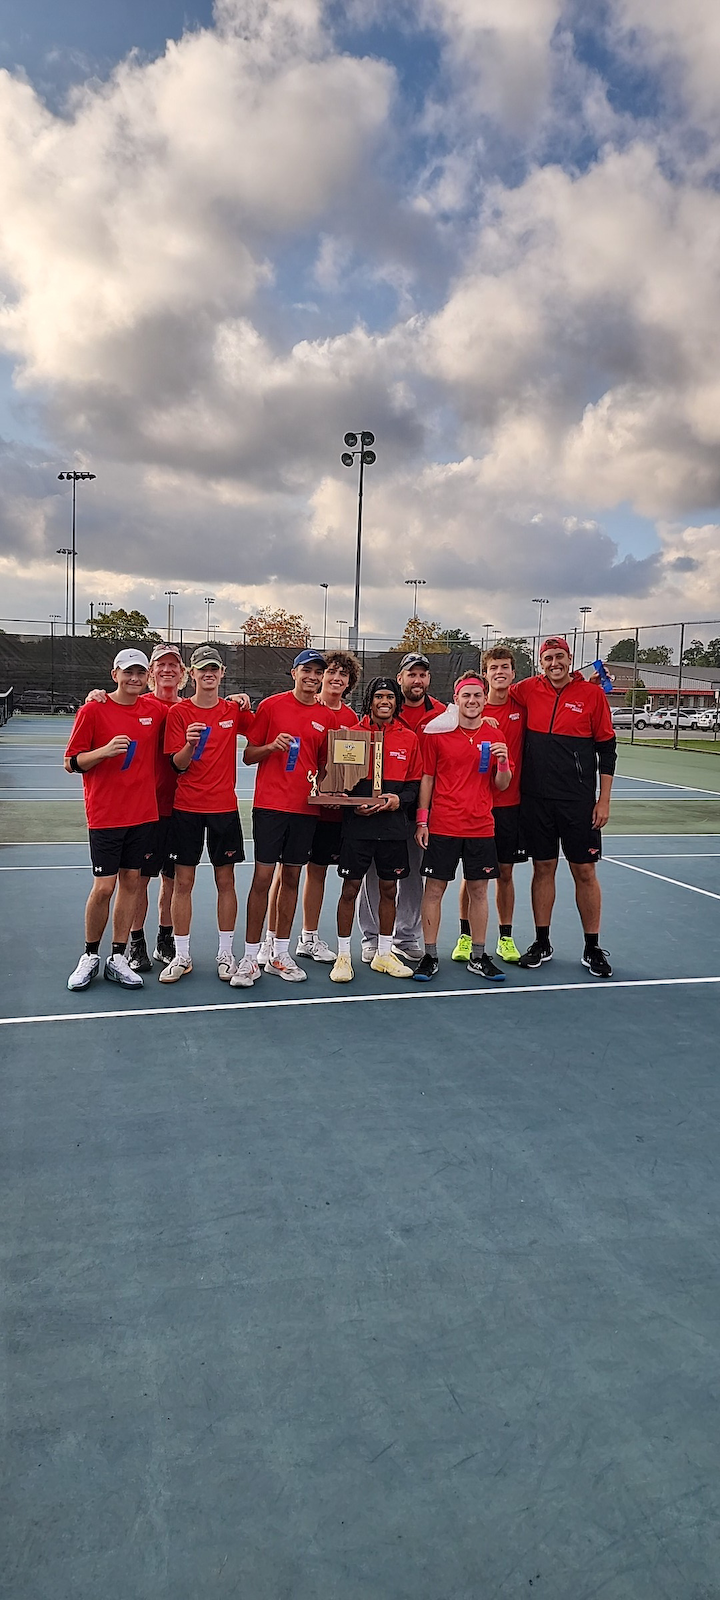 Munster Boys Tennis Wins Sectionals! gallery cover photo